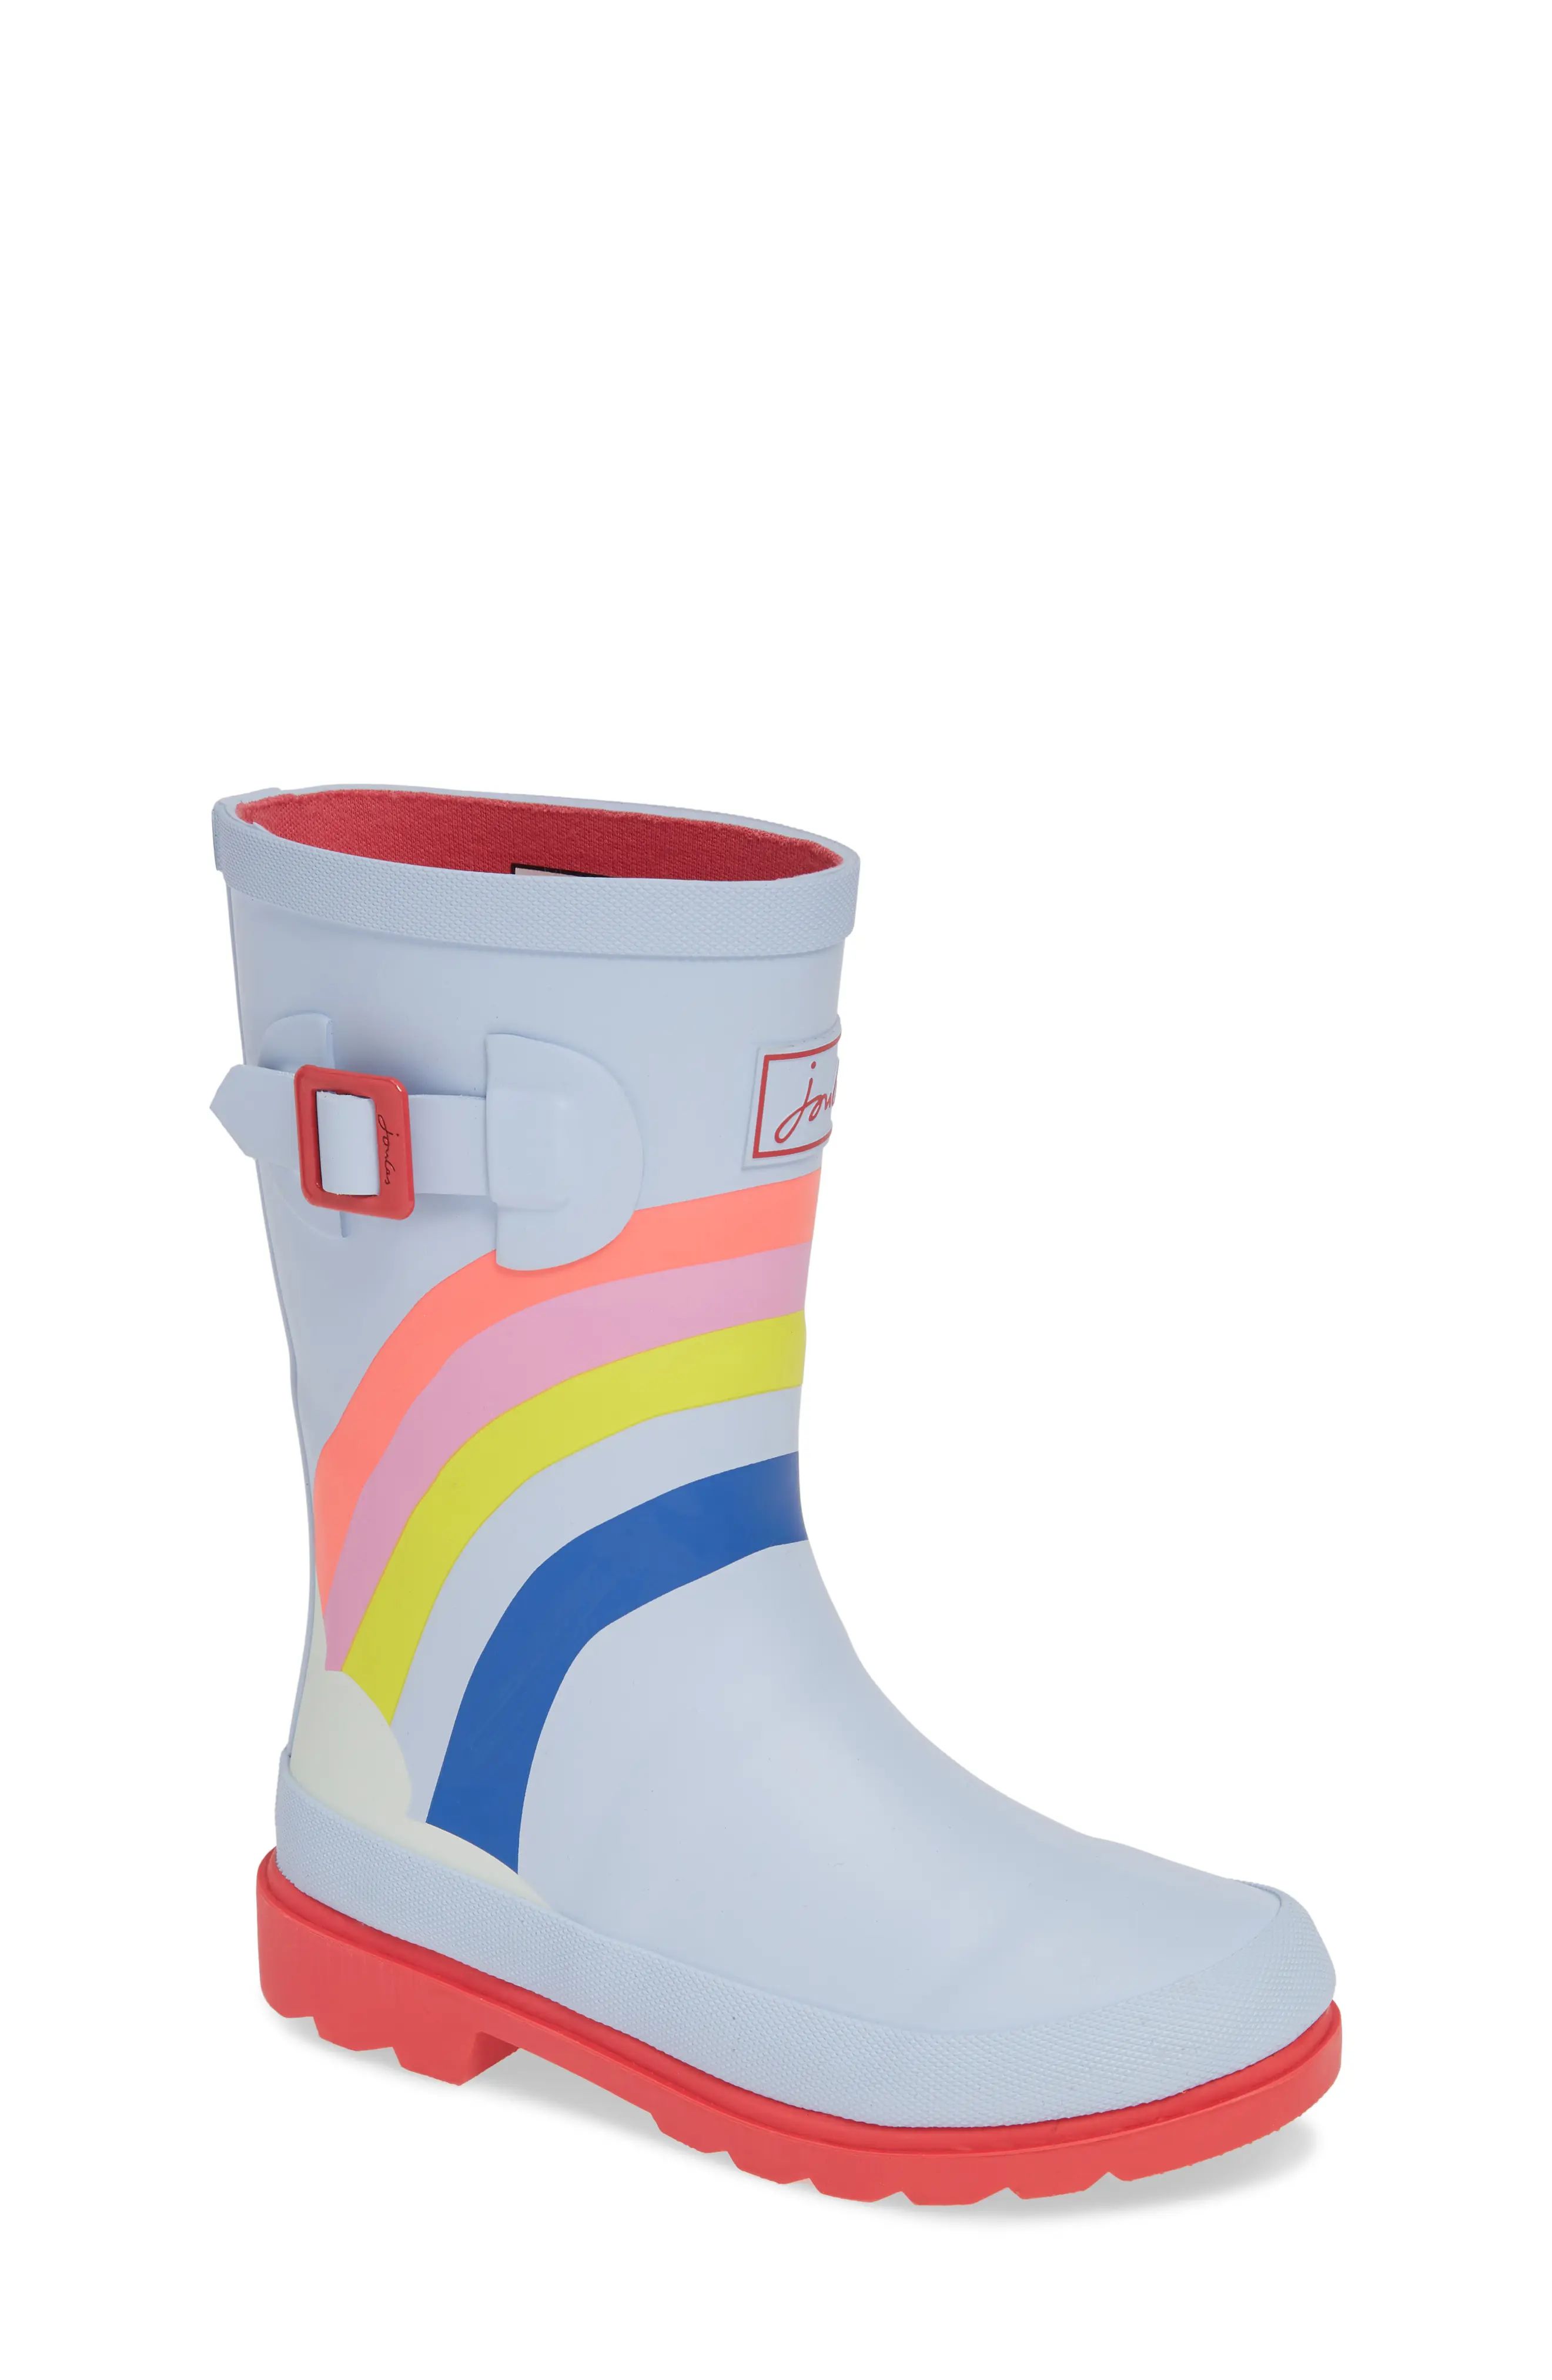 Toddler Girl's Joules Mid Height Print Welly Waterproof Rain Boot, Size 9 M - Blue | Nordstrom